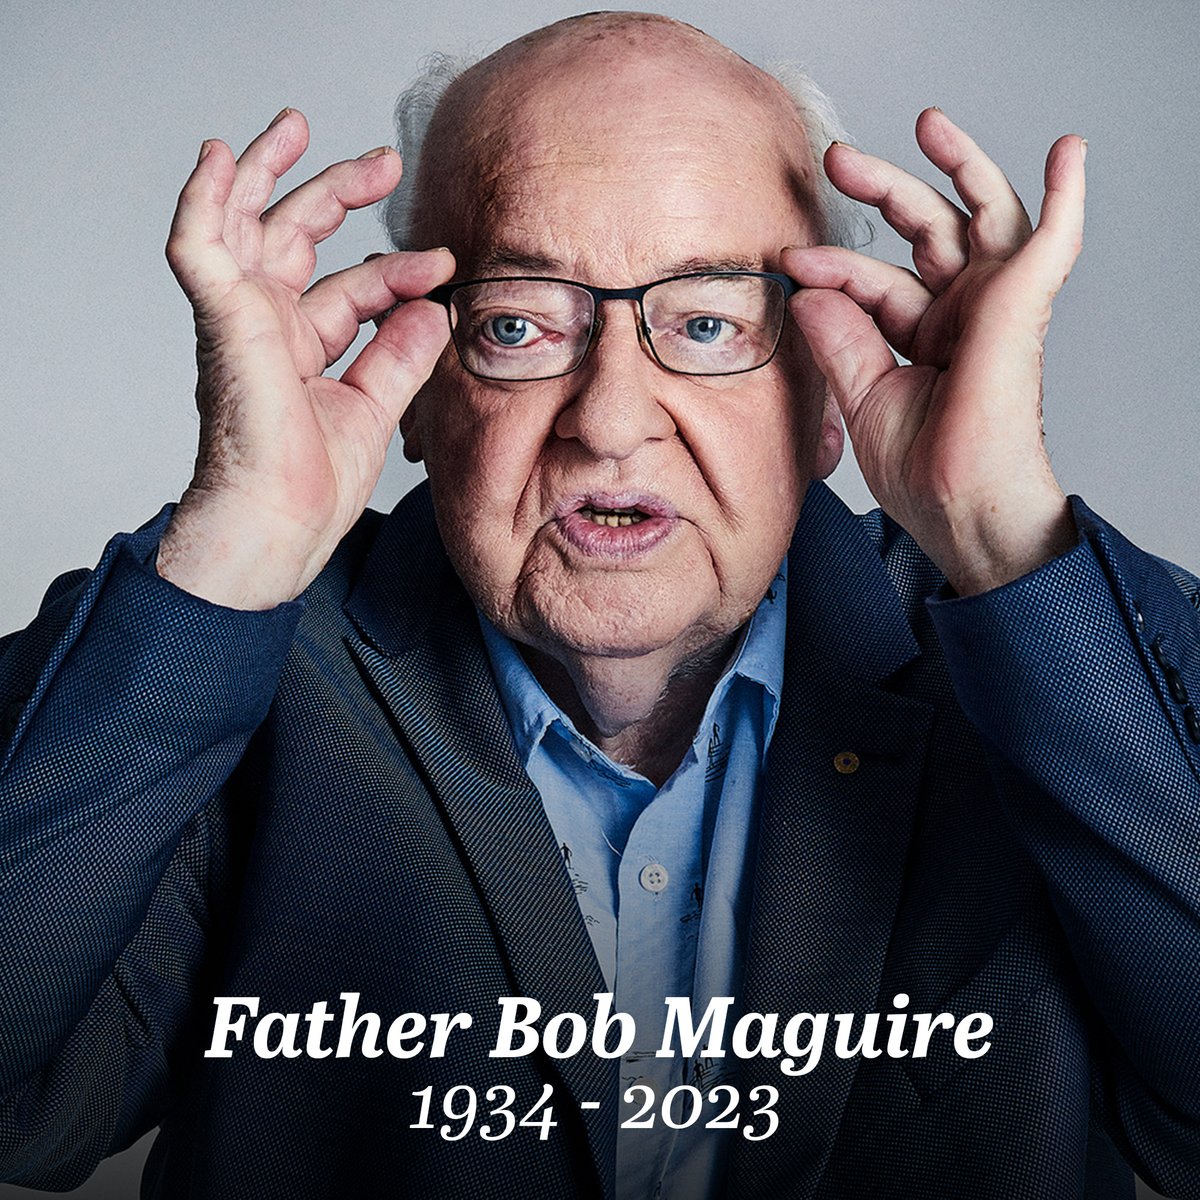 Our nation has just lost a hero. The people's priest. A social justice warrior. And a man who dedicated his life to faith and standing up for those most vulnerable. Vale Father Bob Maguire.